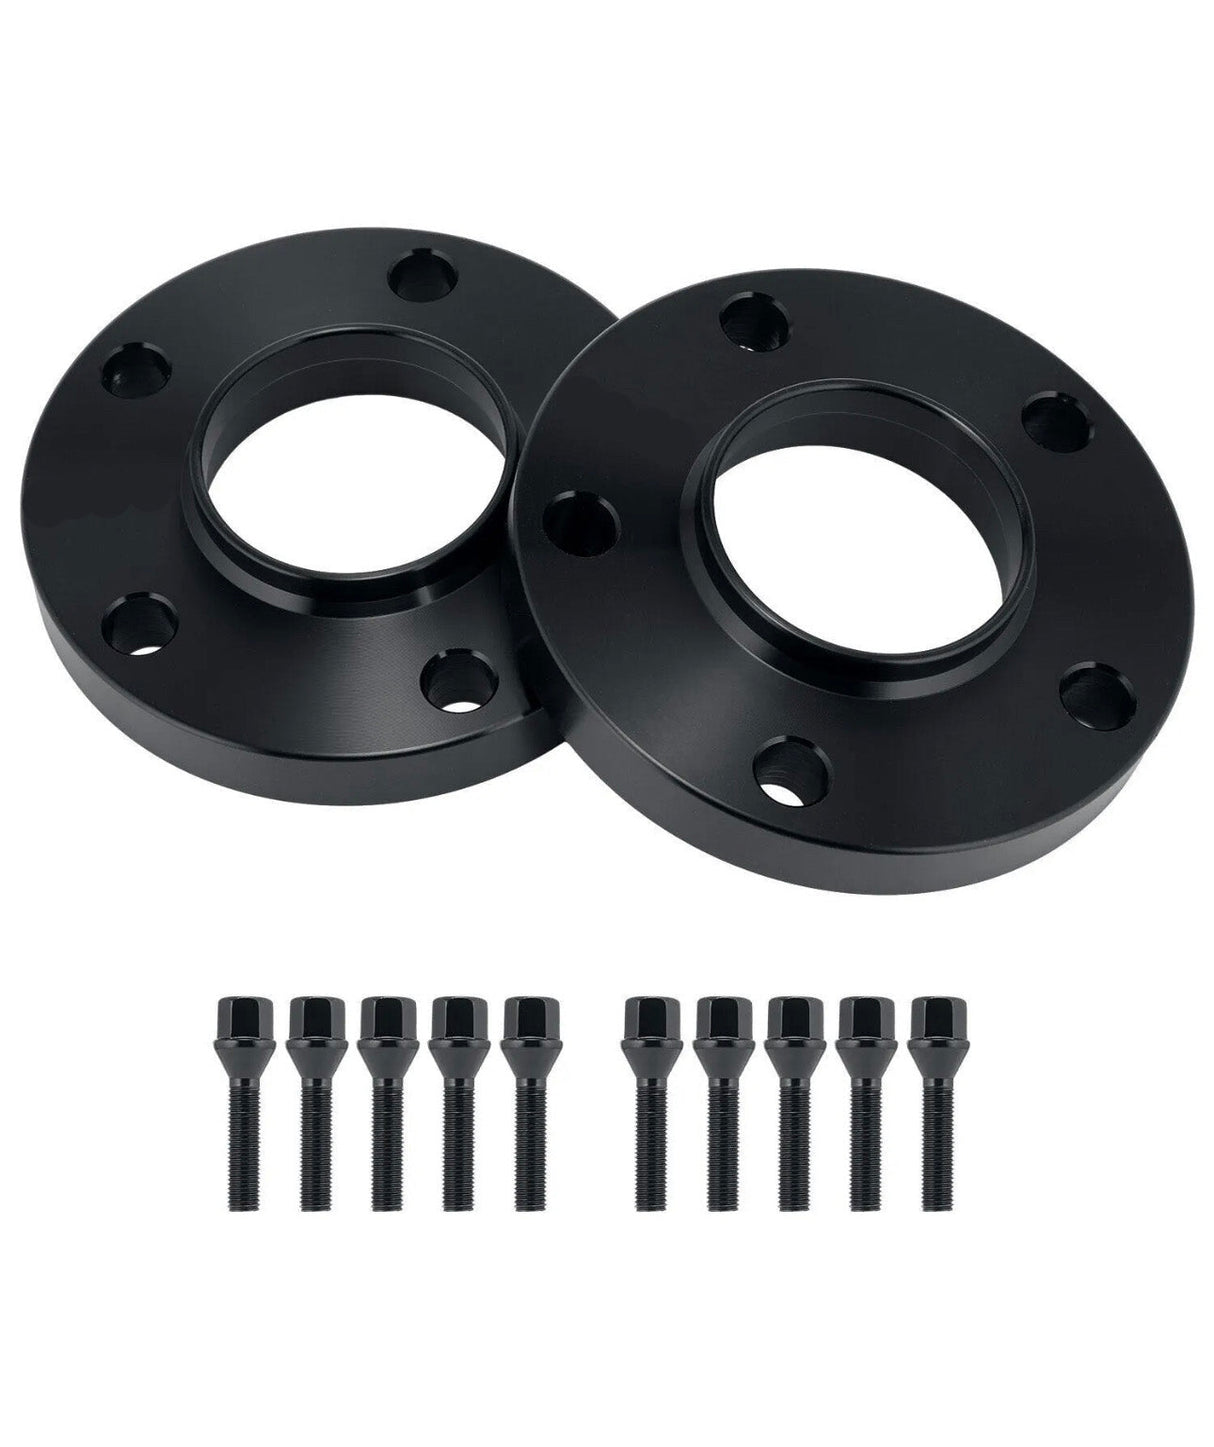 3 Series - F30/F31: Black Wheel Spacers & Bolts 12-18